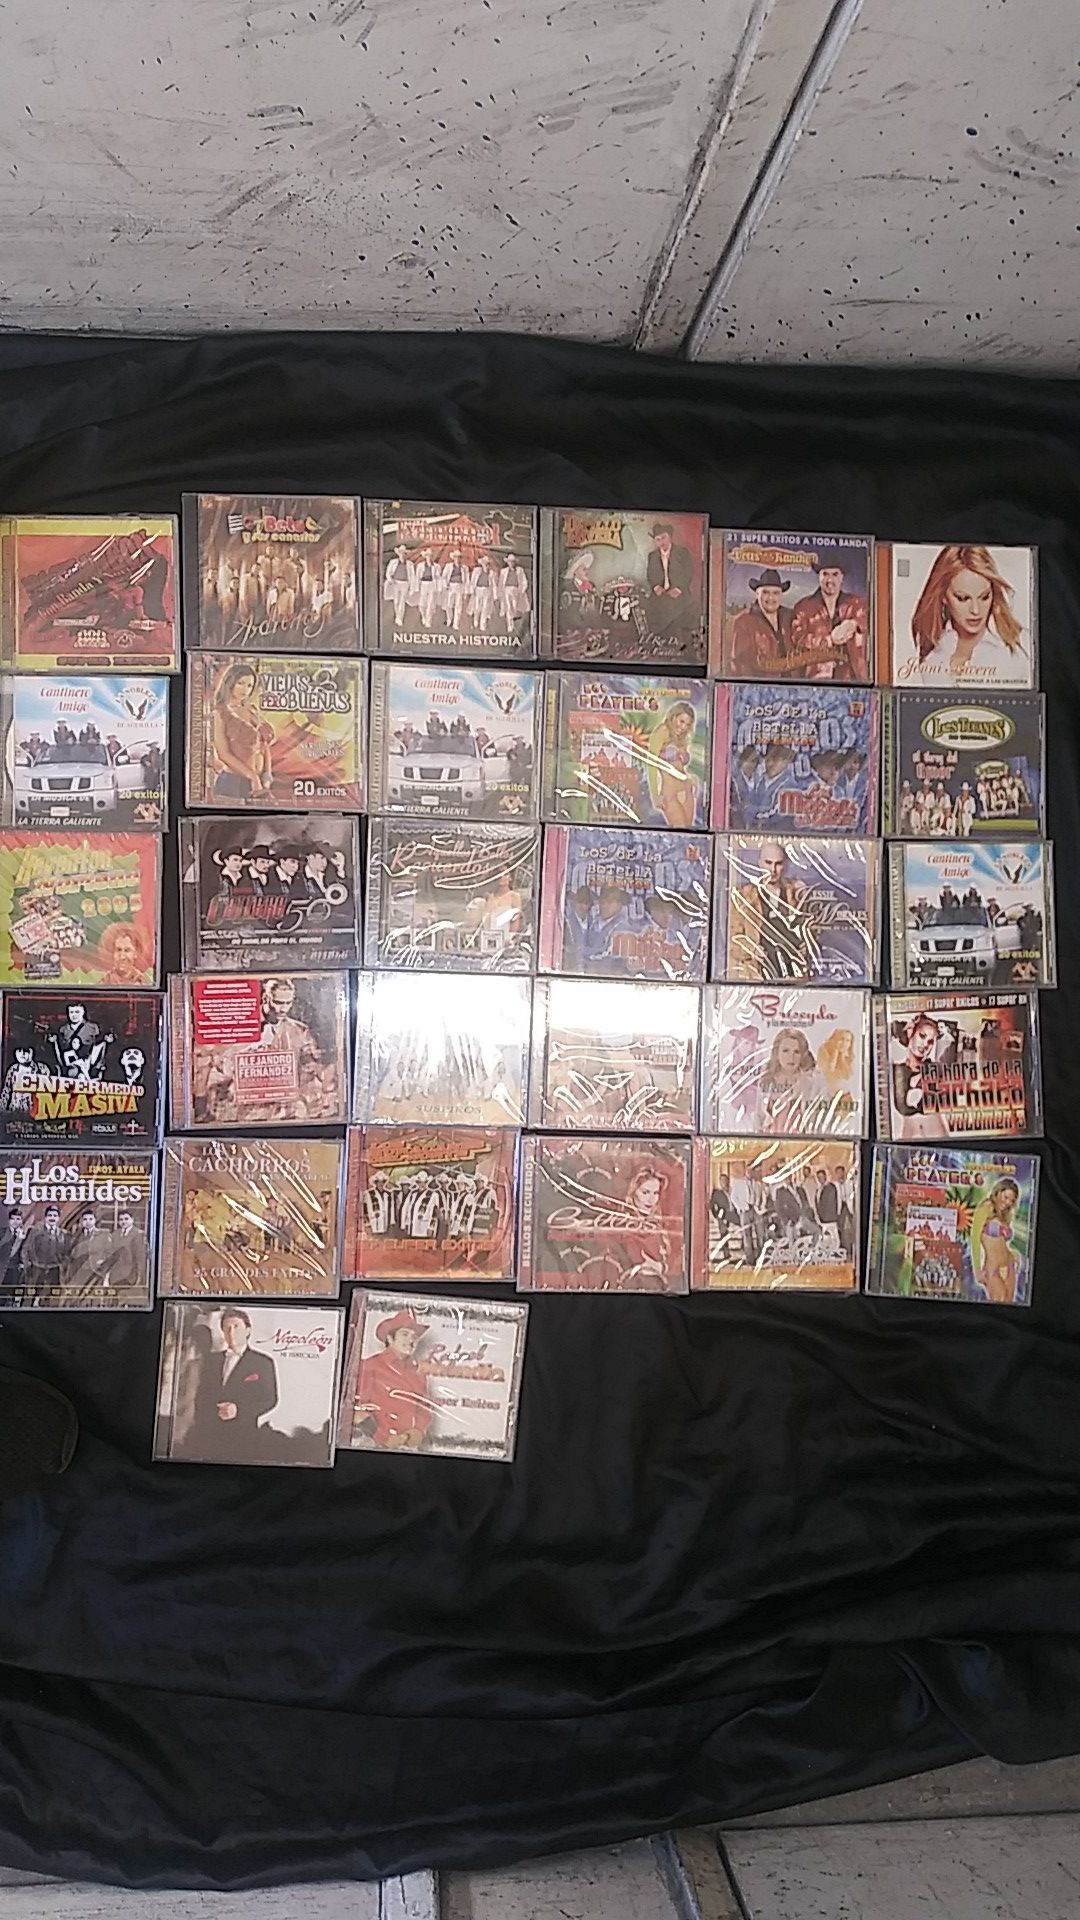 Mexican music CD's